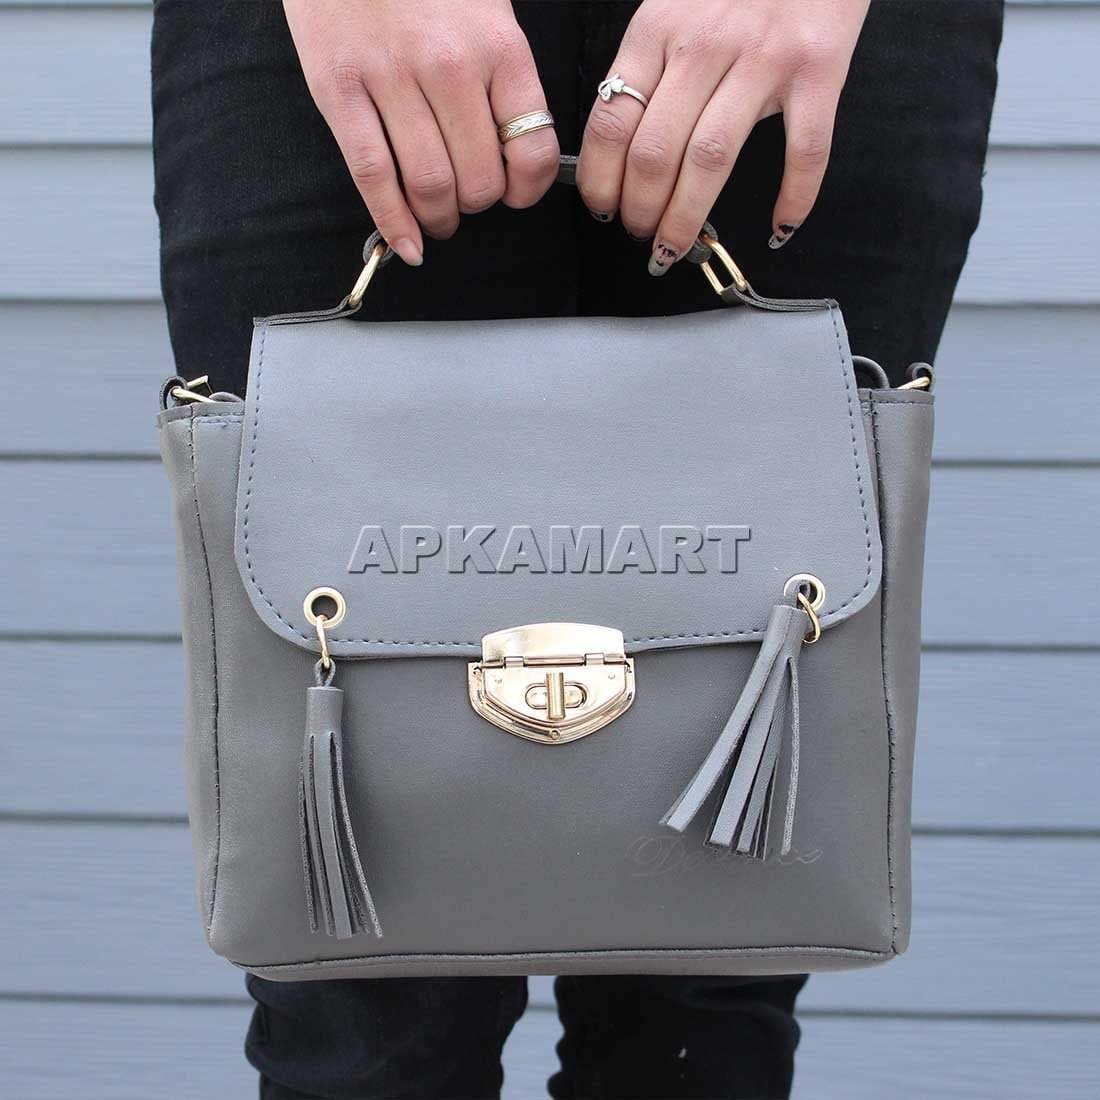 Bags: Shop Bags for Girls, Boys, Women & Men Online at Best Prices - Zouk